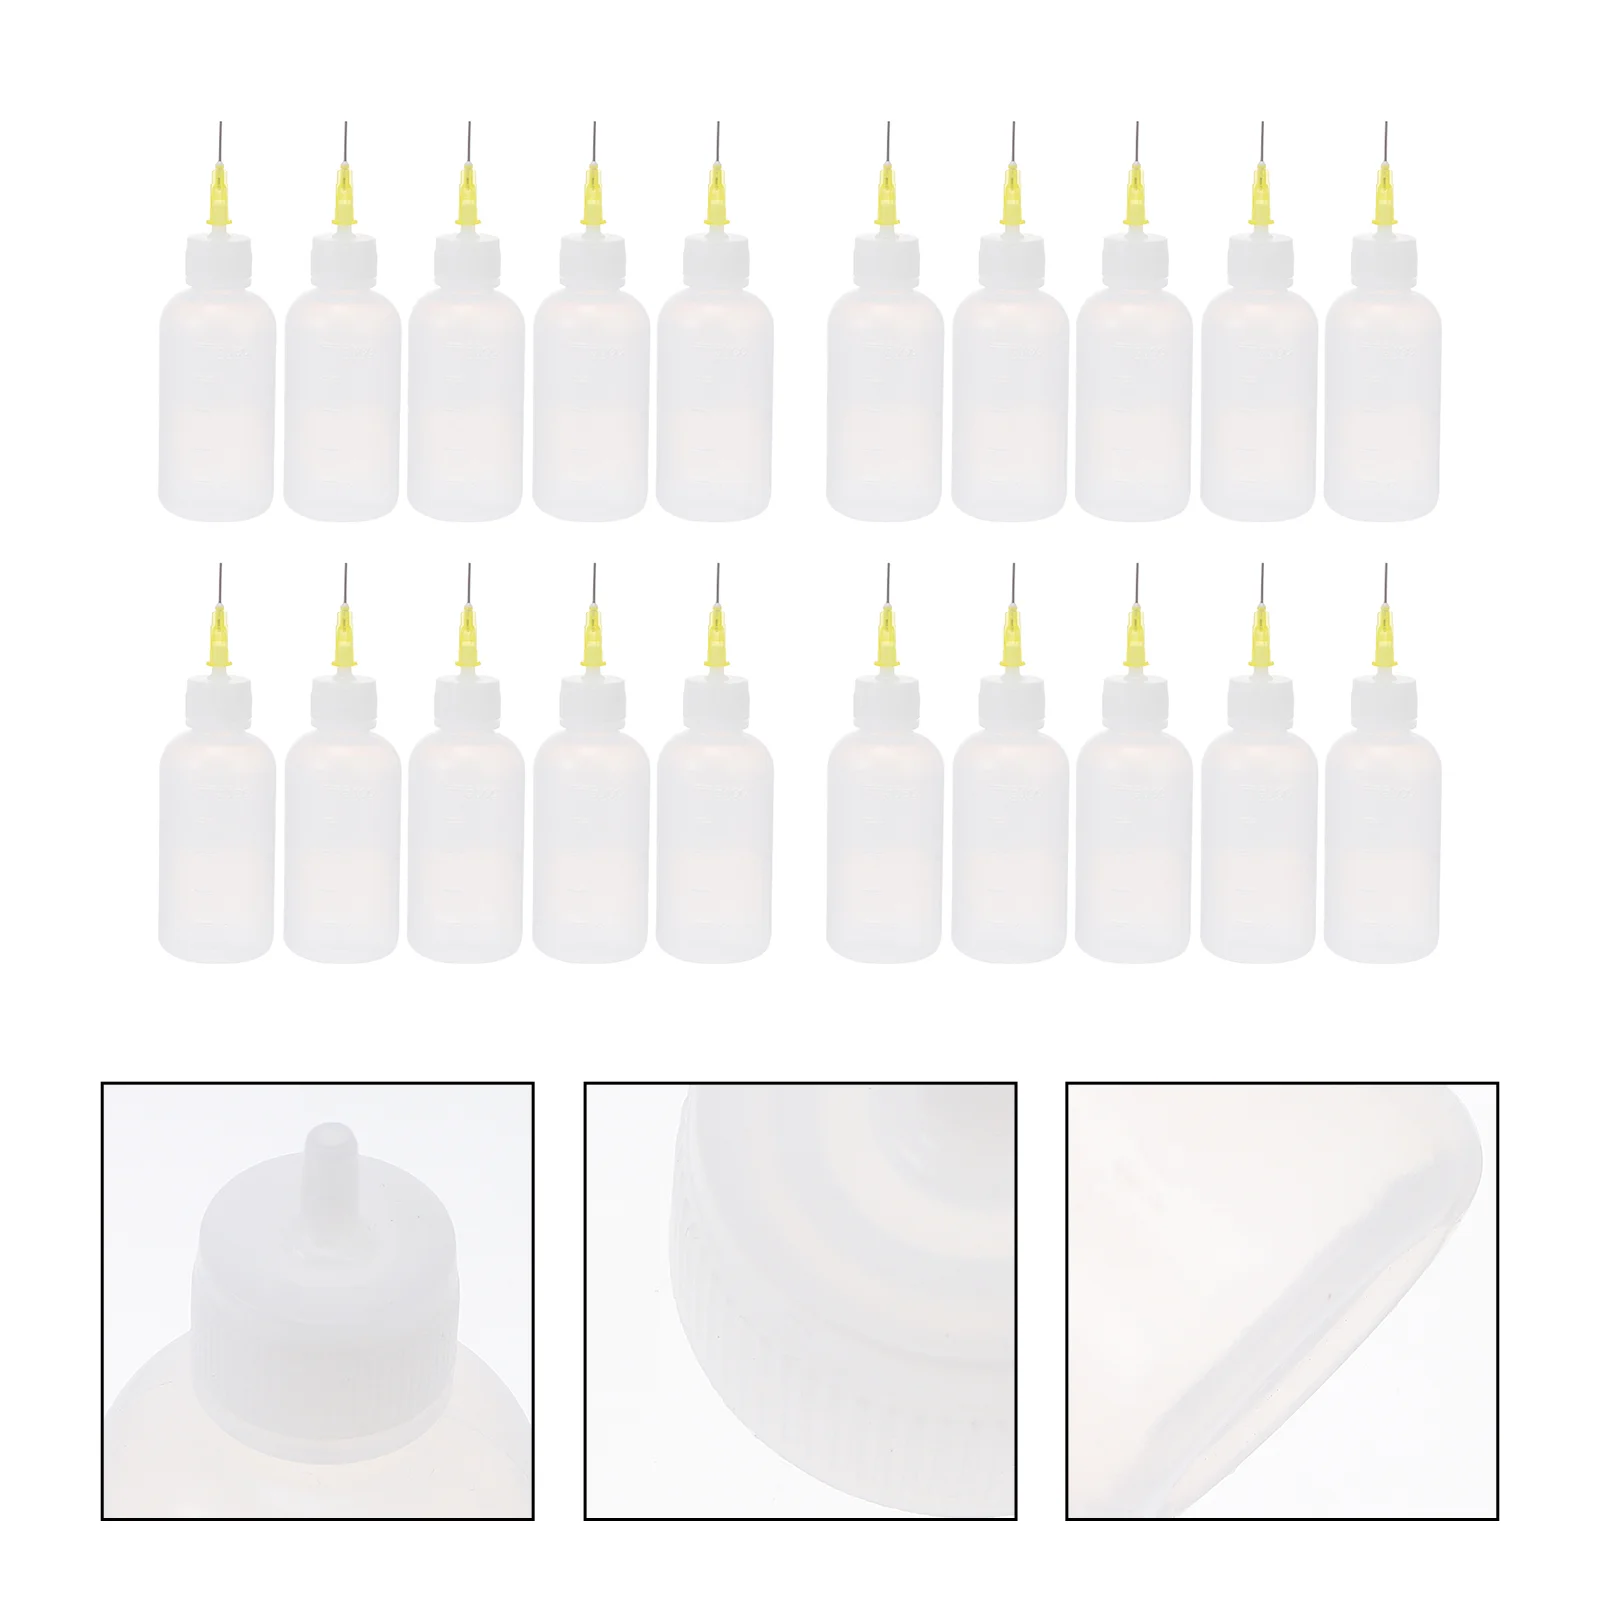 

Bottle Tip Glue Needle Applicator Bottles Squeeze Precision Dropper Quillingliquid Blunt Projects Fine Mouth Pointed Gluing